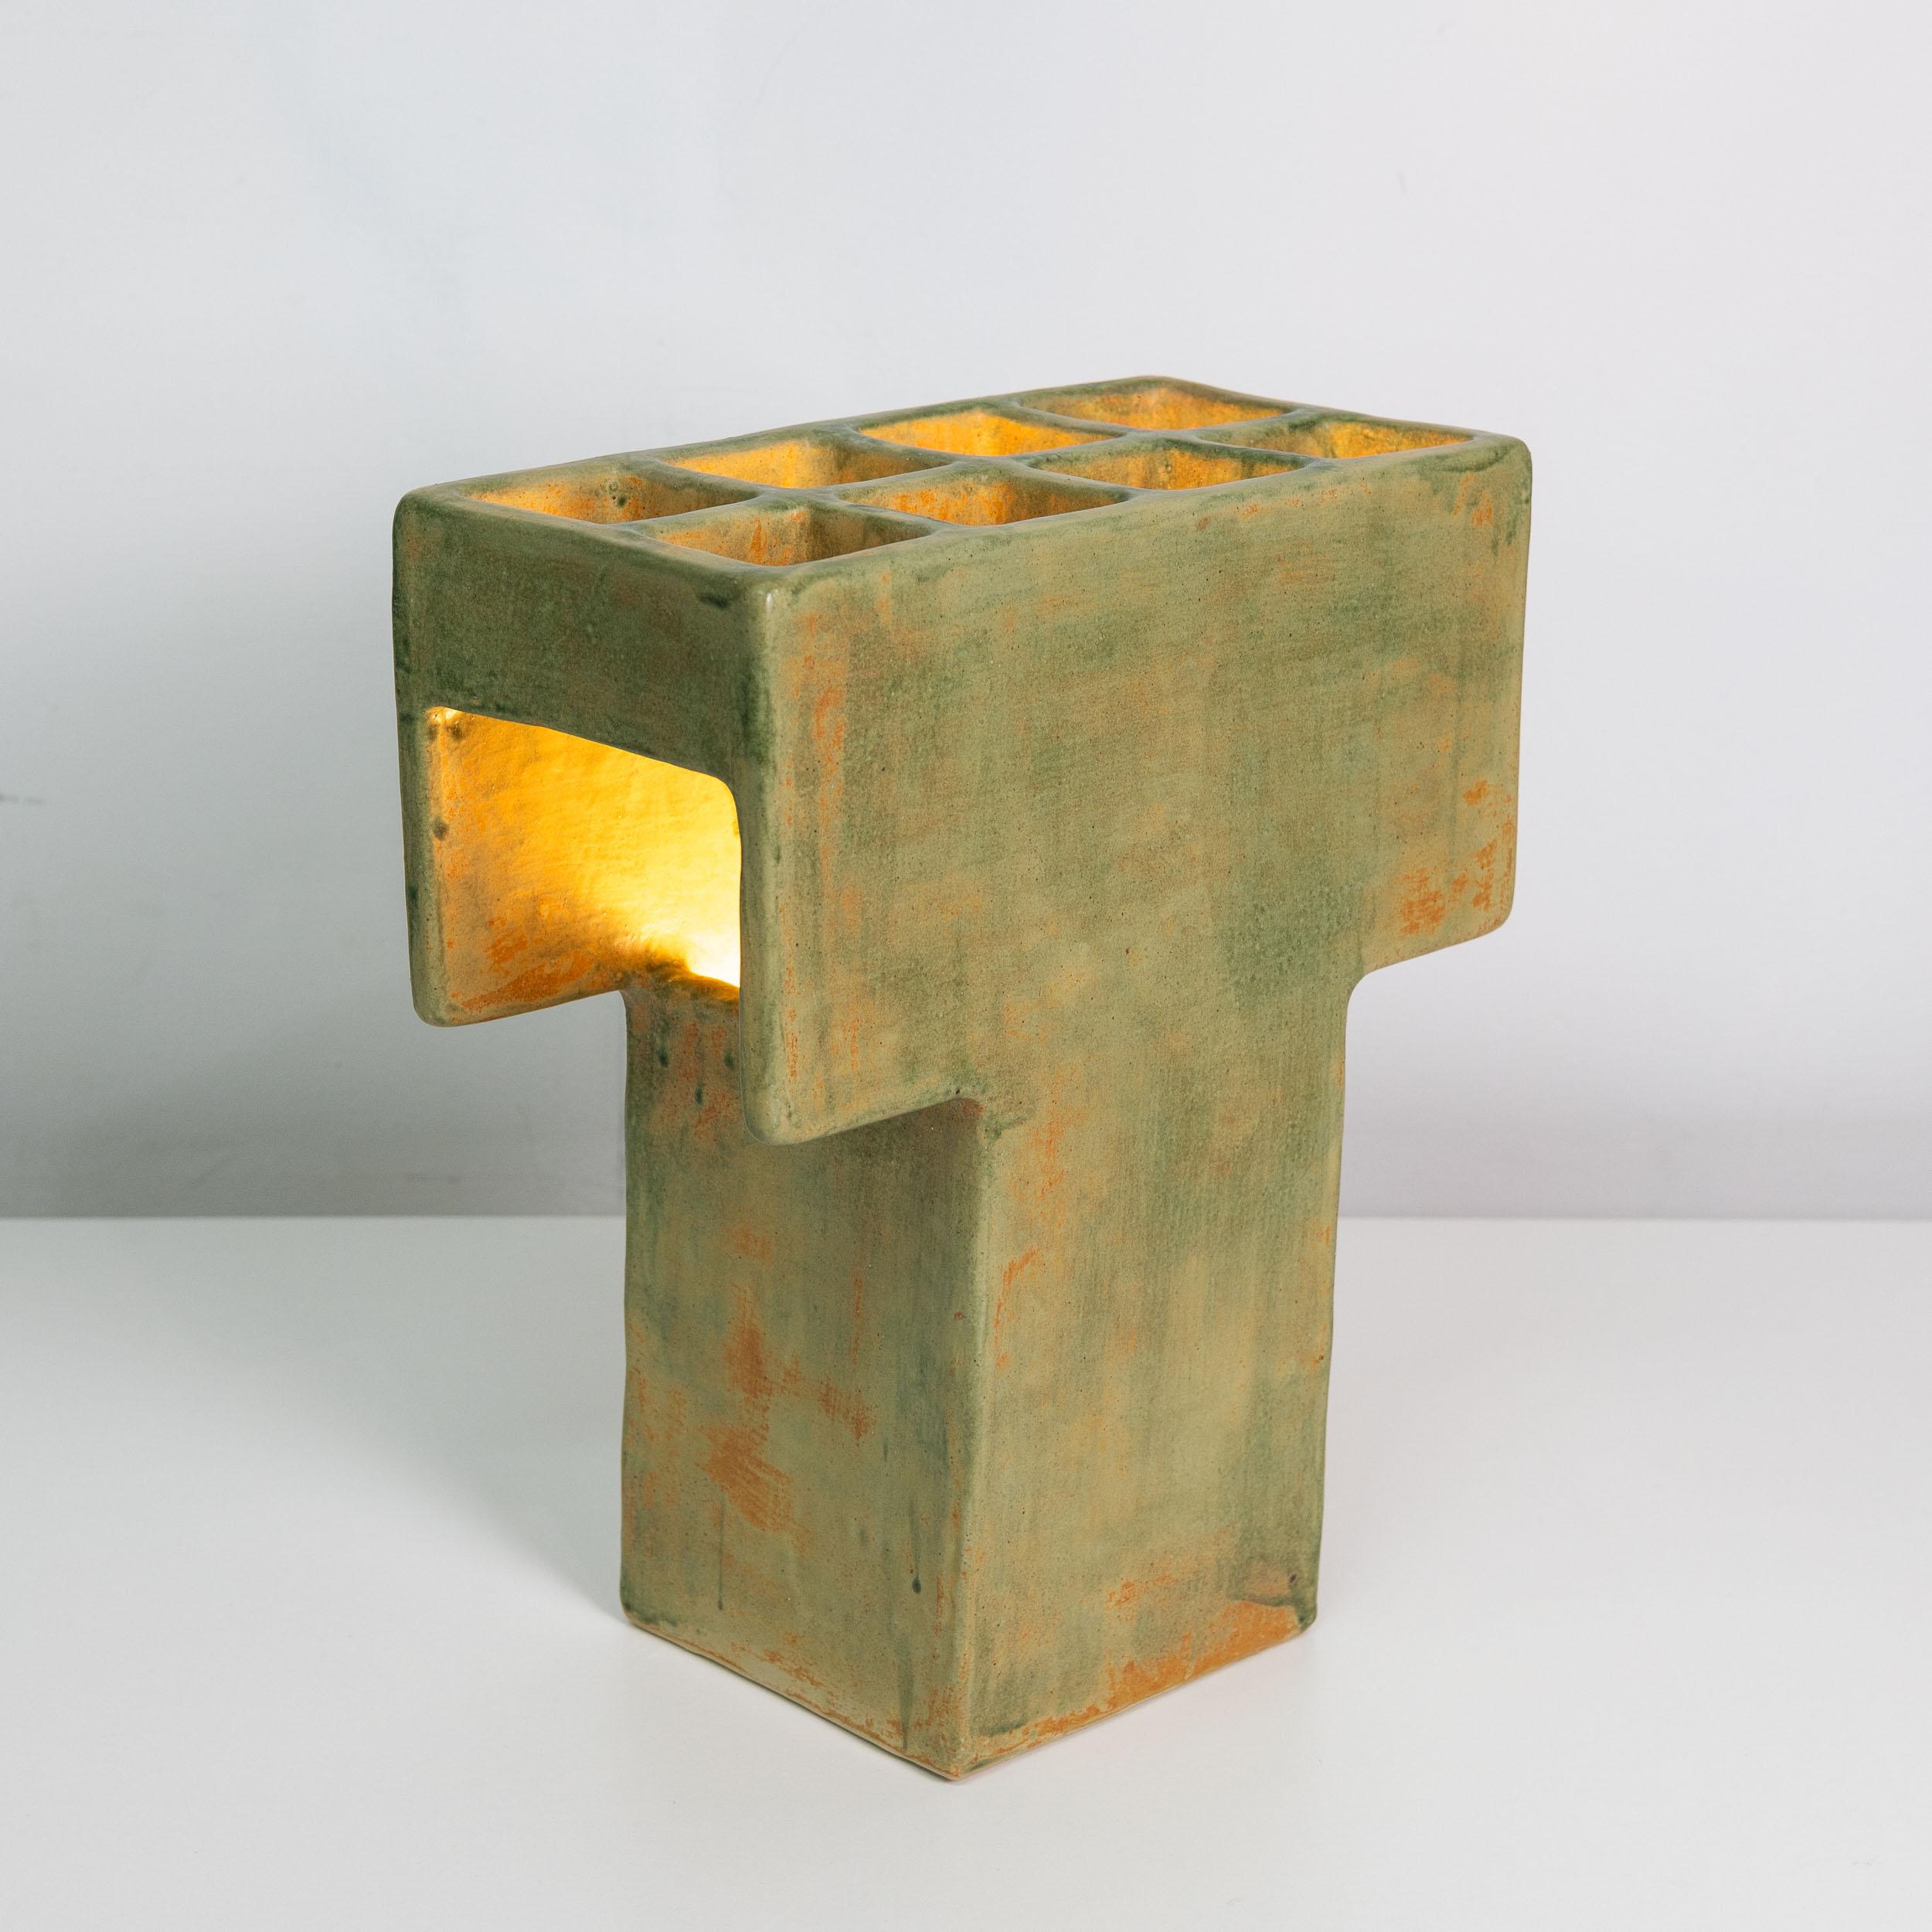 A one-of-a-kind ceramic table lamp inspired by brutalist architecture of the 1960s & 1970s. Handcrafted from clay slabs and finished with a subtle textured glaze. 

Mr. T Table Lamp by Luft Tanaka Studio

1 unit in stock. Ships in 7 business